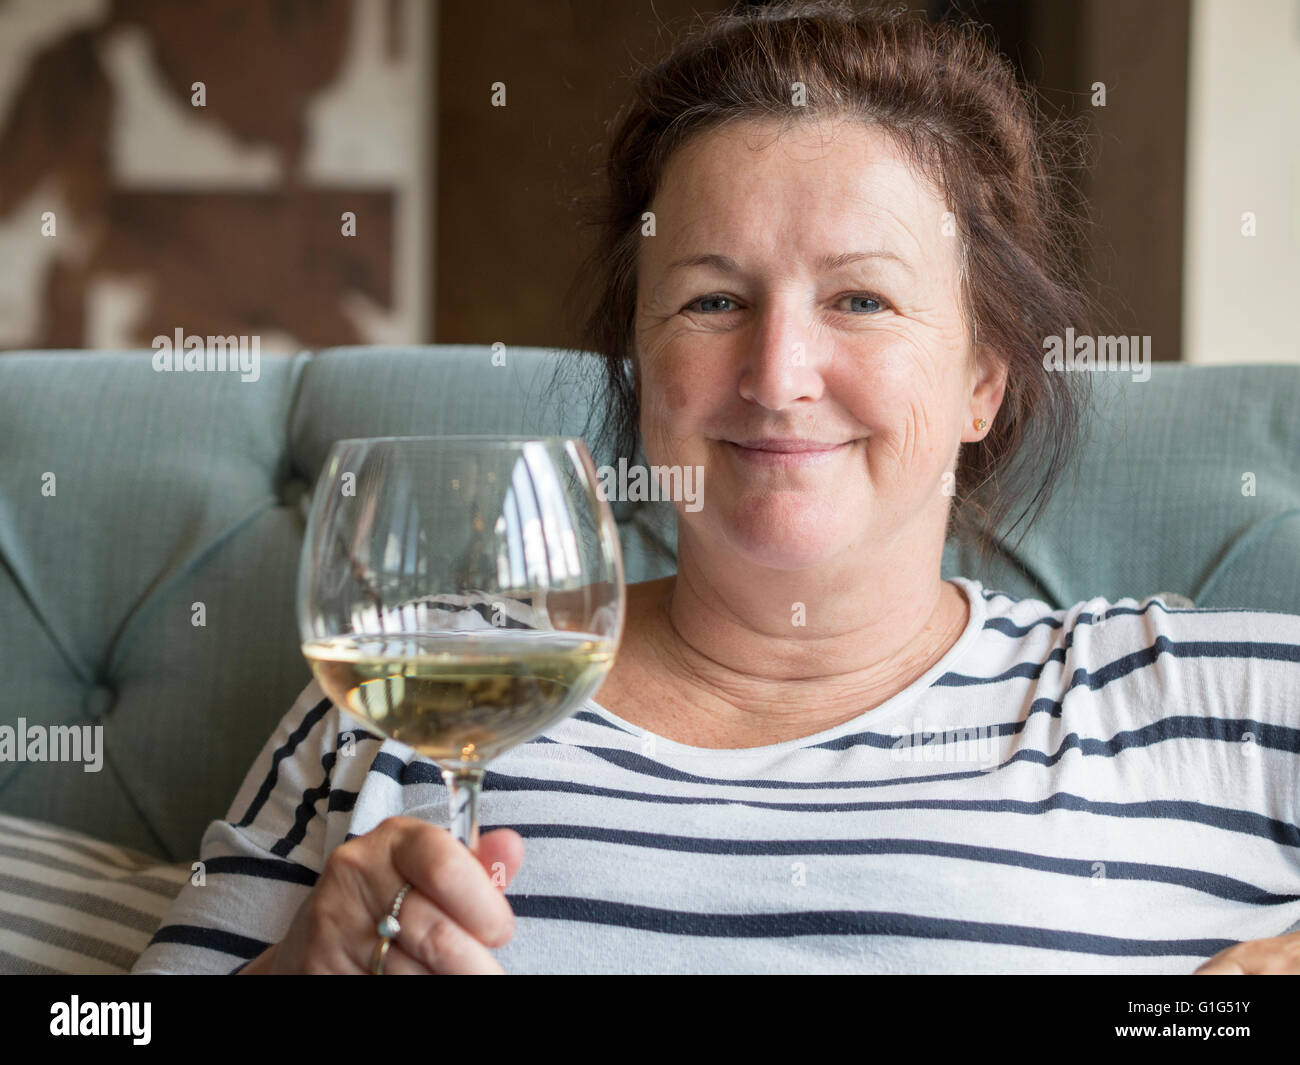 A middle-aged Caucasian woman holding a large glass of white wine. Stock Photo